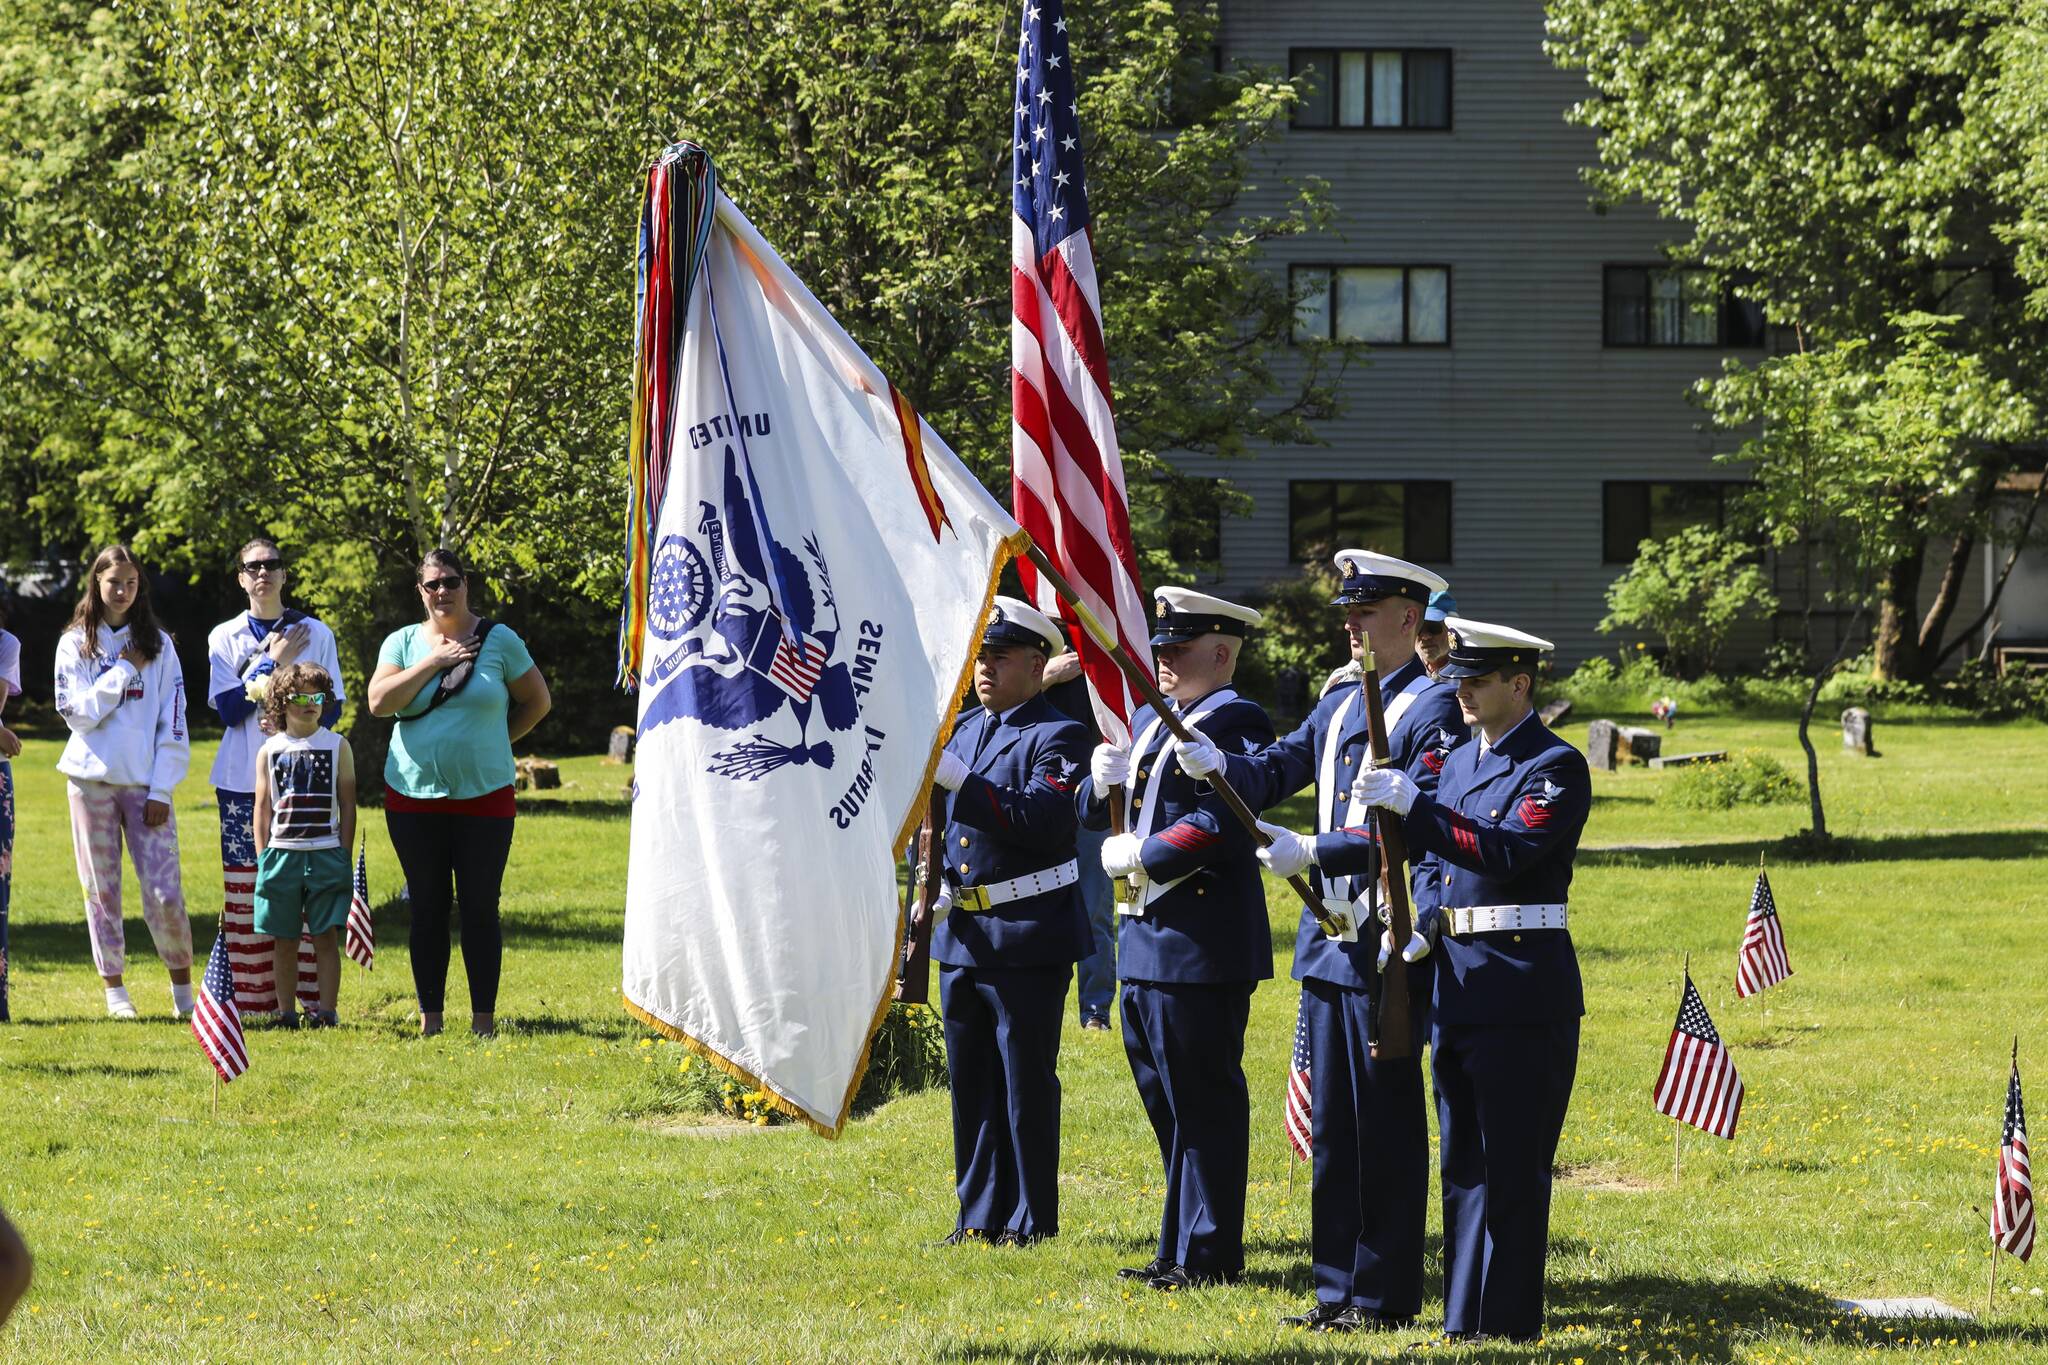 A Coast Guard color guard presents the colors during a Memorial Day ceremony held by the Veterans of Foreign Wars at Evergreen Cemetery on May 30, 2022. (Michael S. Lockett / Juneau Empire)